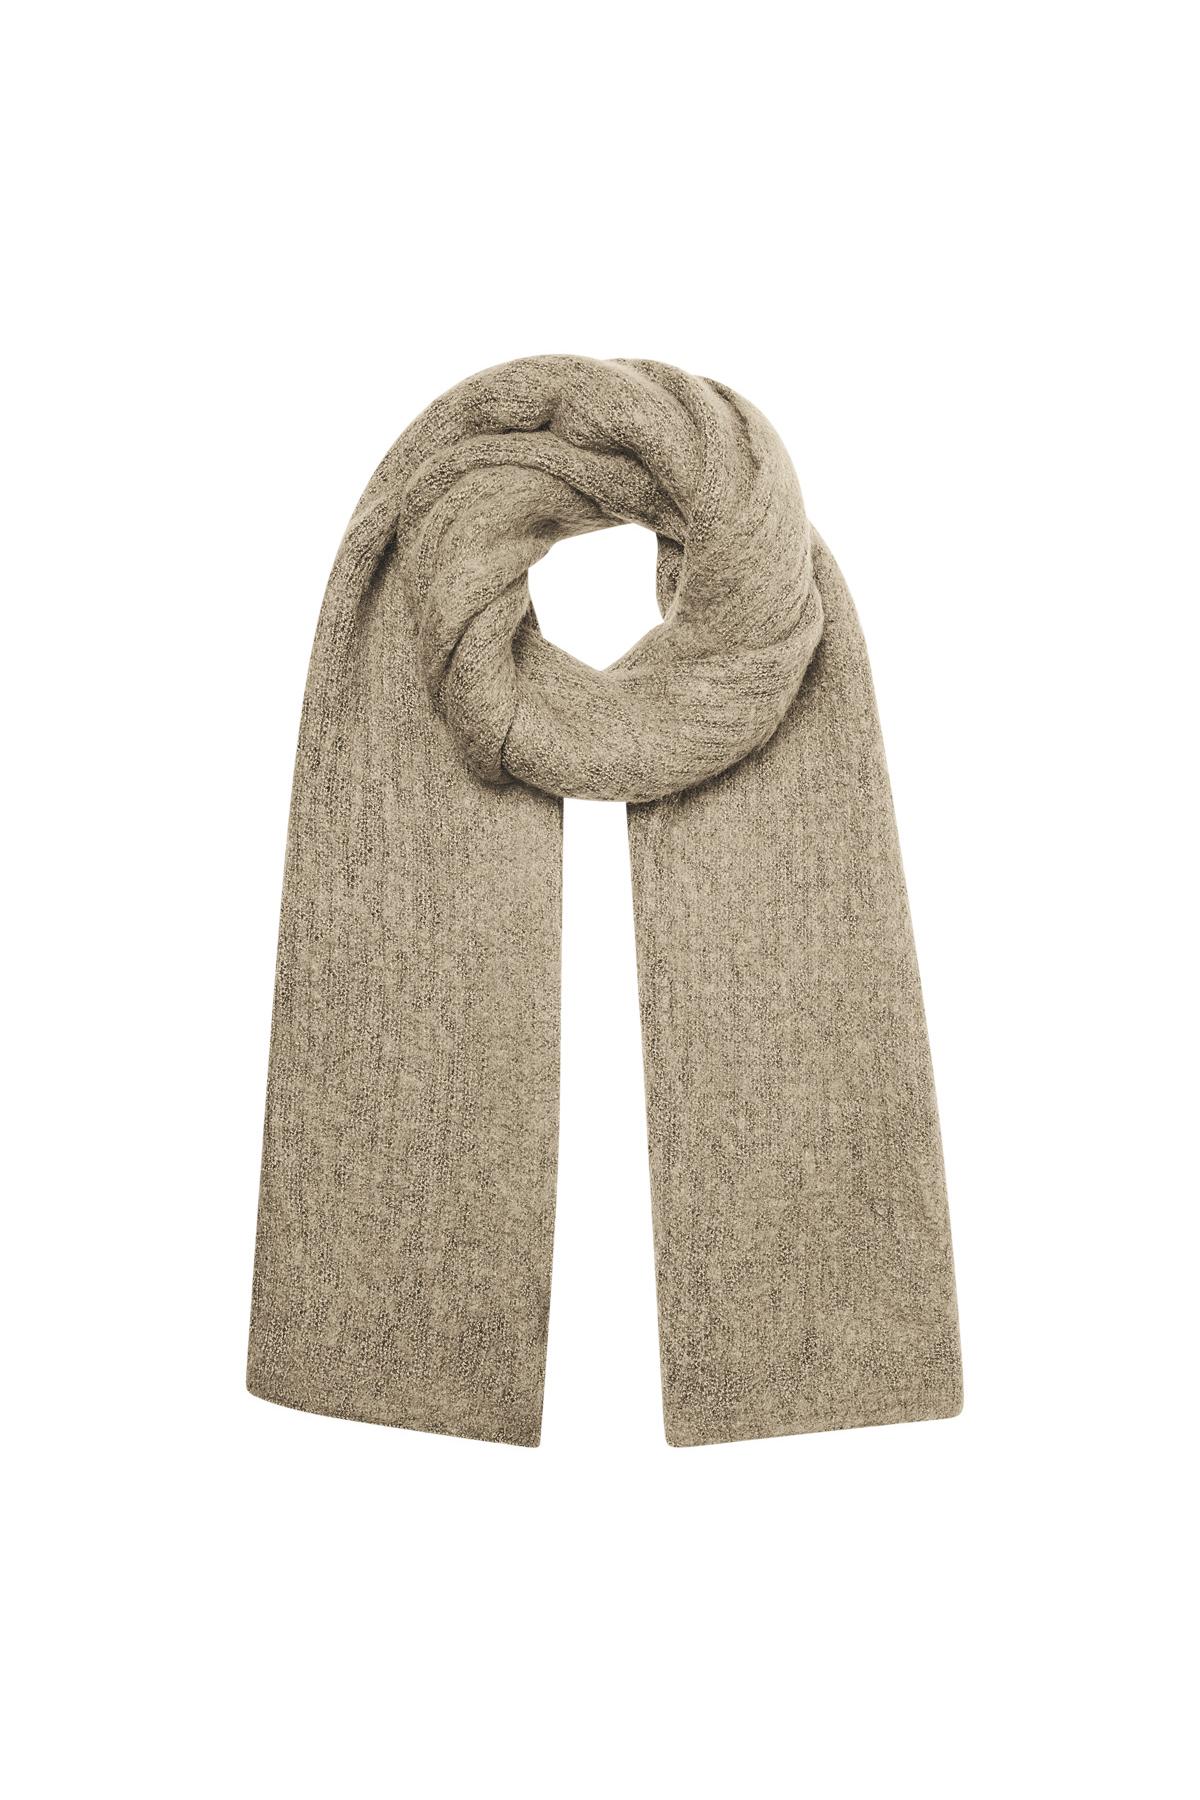 Scarf knitted plain - beige 